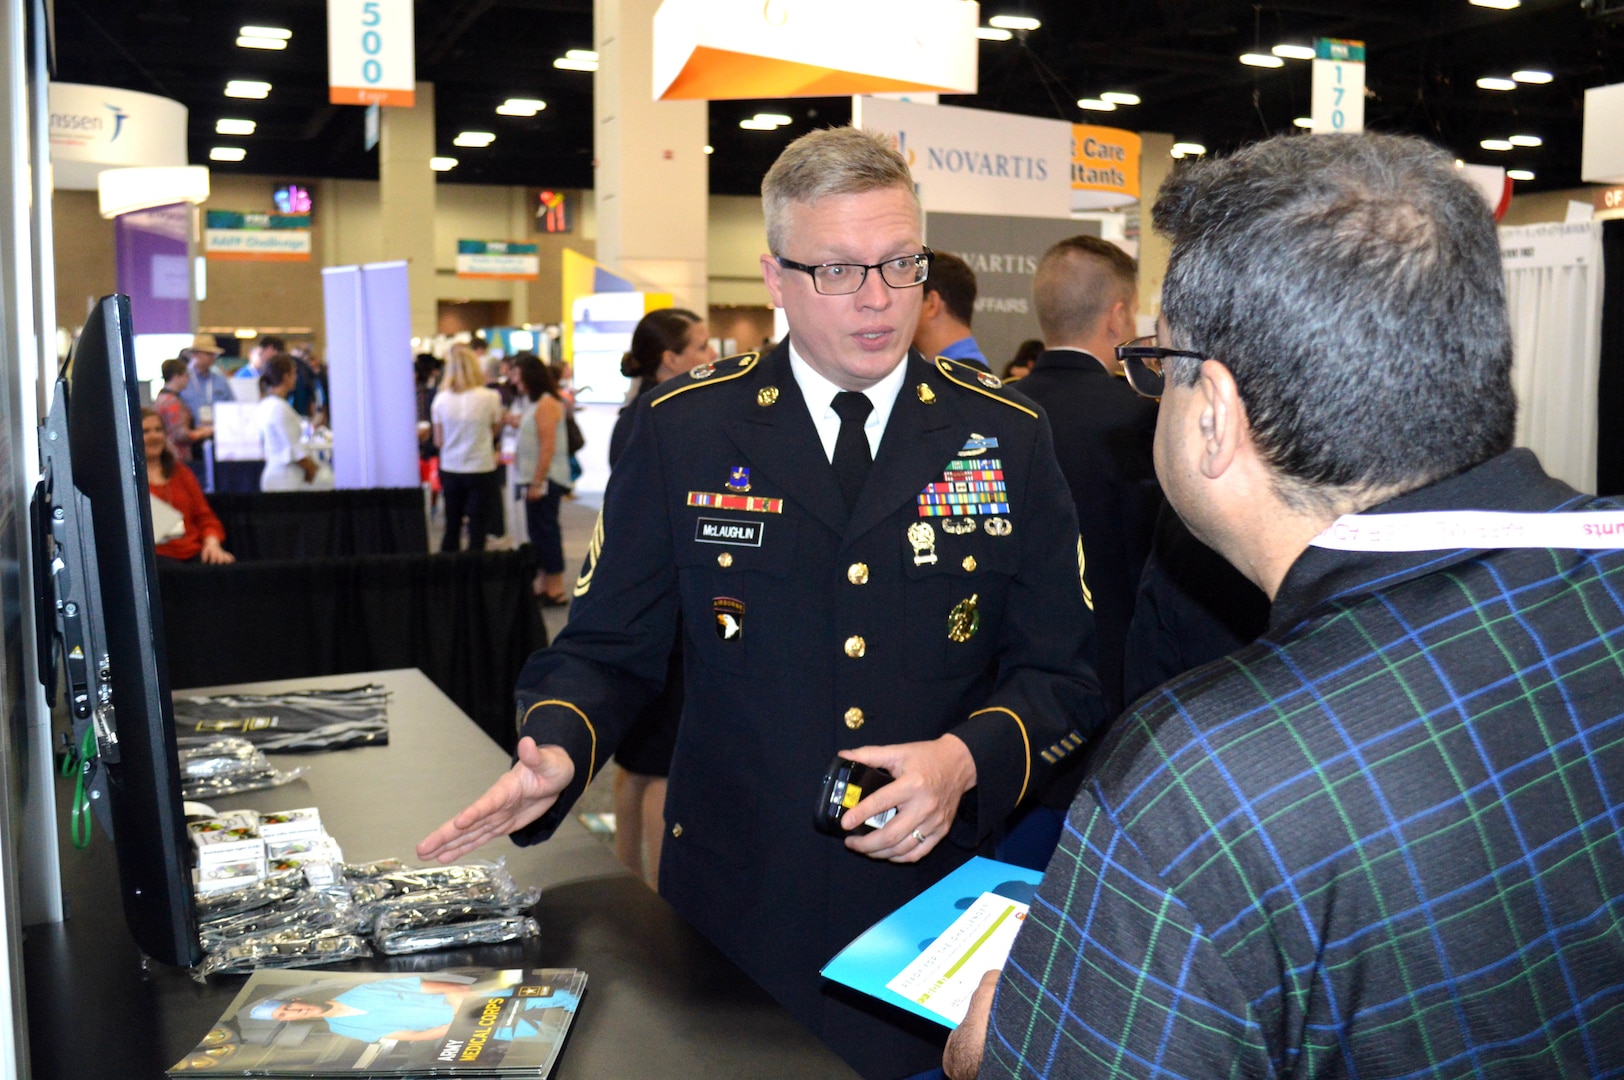 Army Sgt. 1st Class Chad McLaughlin, lead recruiter for the San Antonio Medical Recruiting Center, explains Army Medical Corps careers to an attendee of the American Academy of Family Physicians Family Medicine Experience 2017 or FMX 2017, Sept. 14 at the Henry B. Gonzales Convention Center in downtown San Antonio.